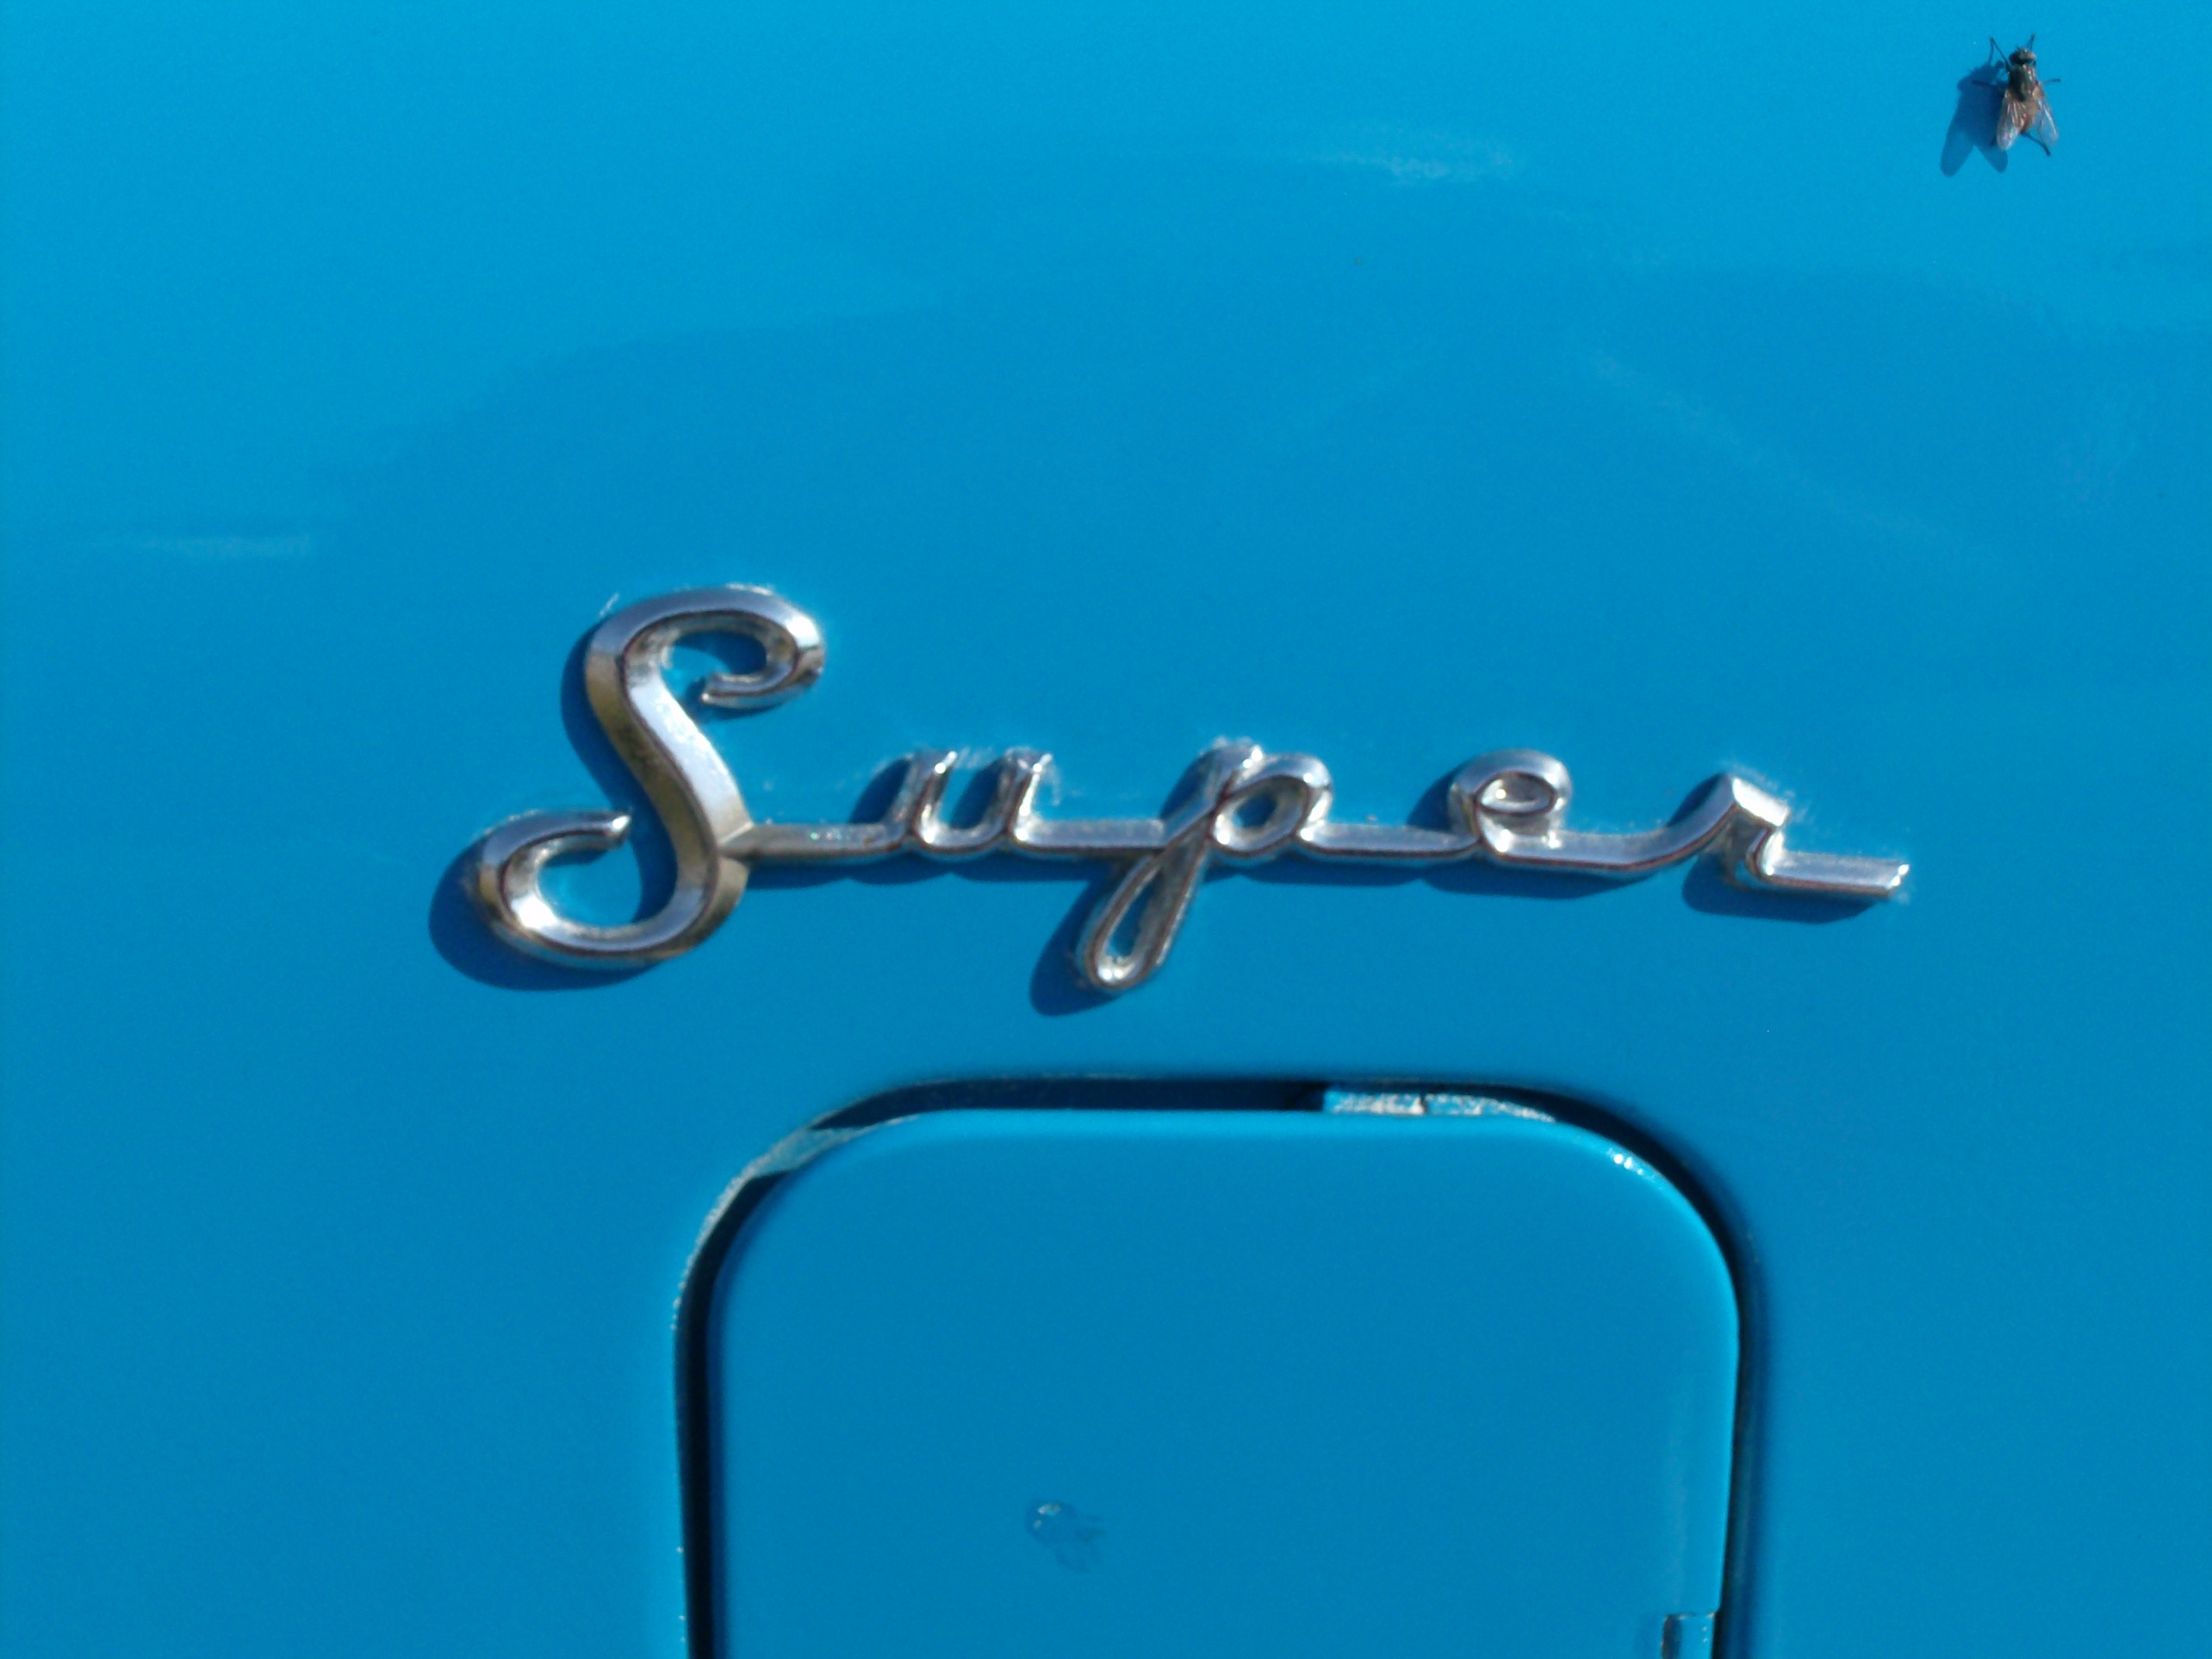 Crosley Super Sedan: Photo gallery, complete information about ...